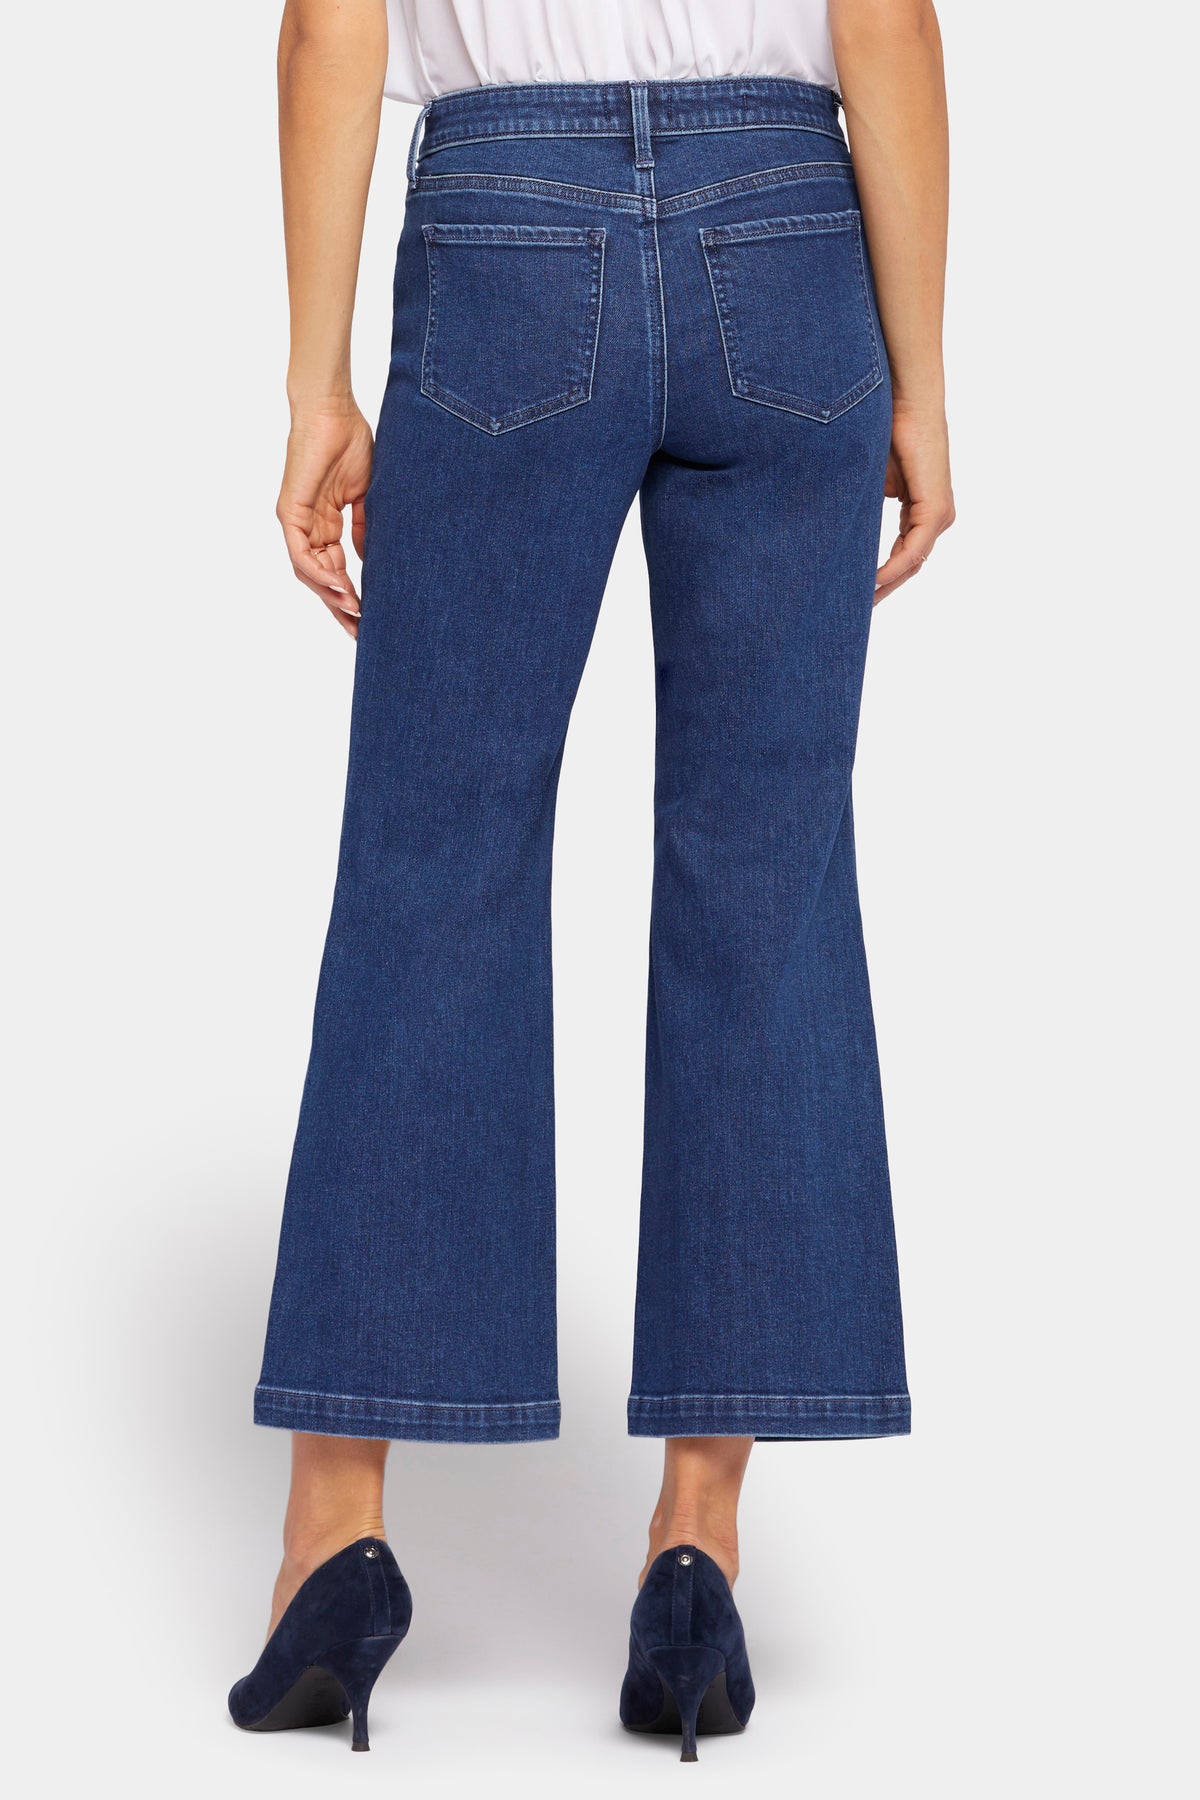 NYDJ Relaxed Flare Jeans